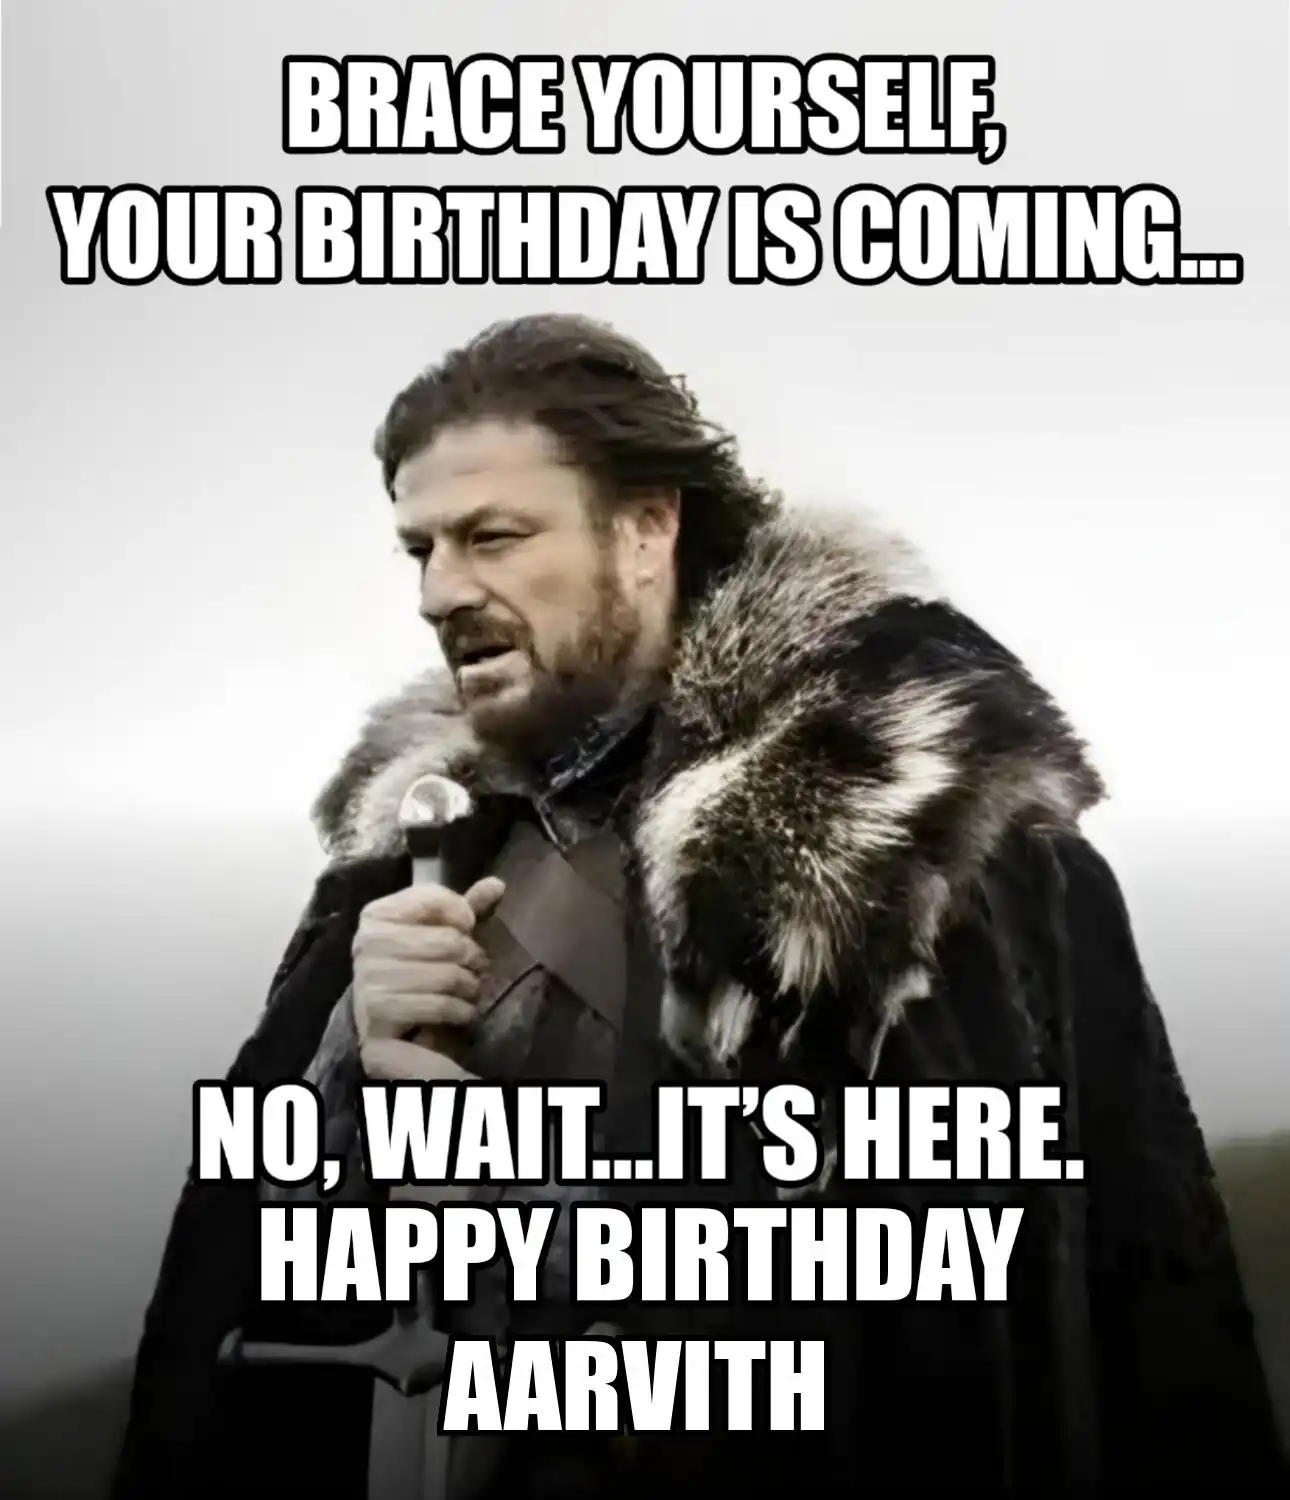 Happy Birthday Aarvith Brace Yourself Your Birthday Is Coming Meme